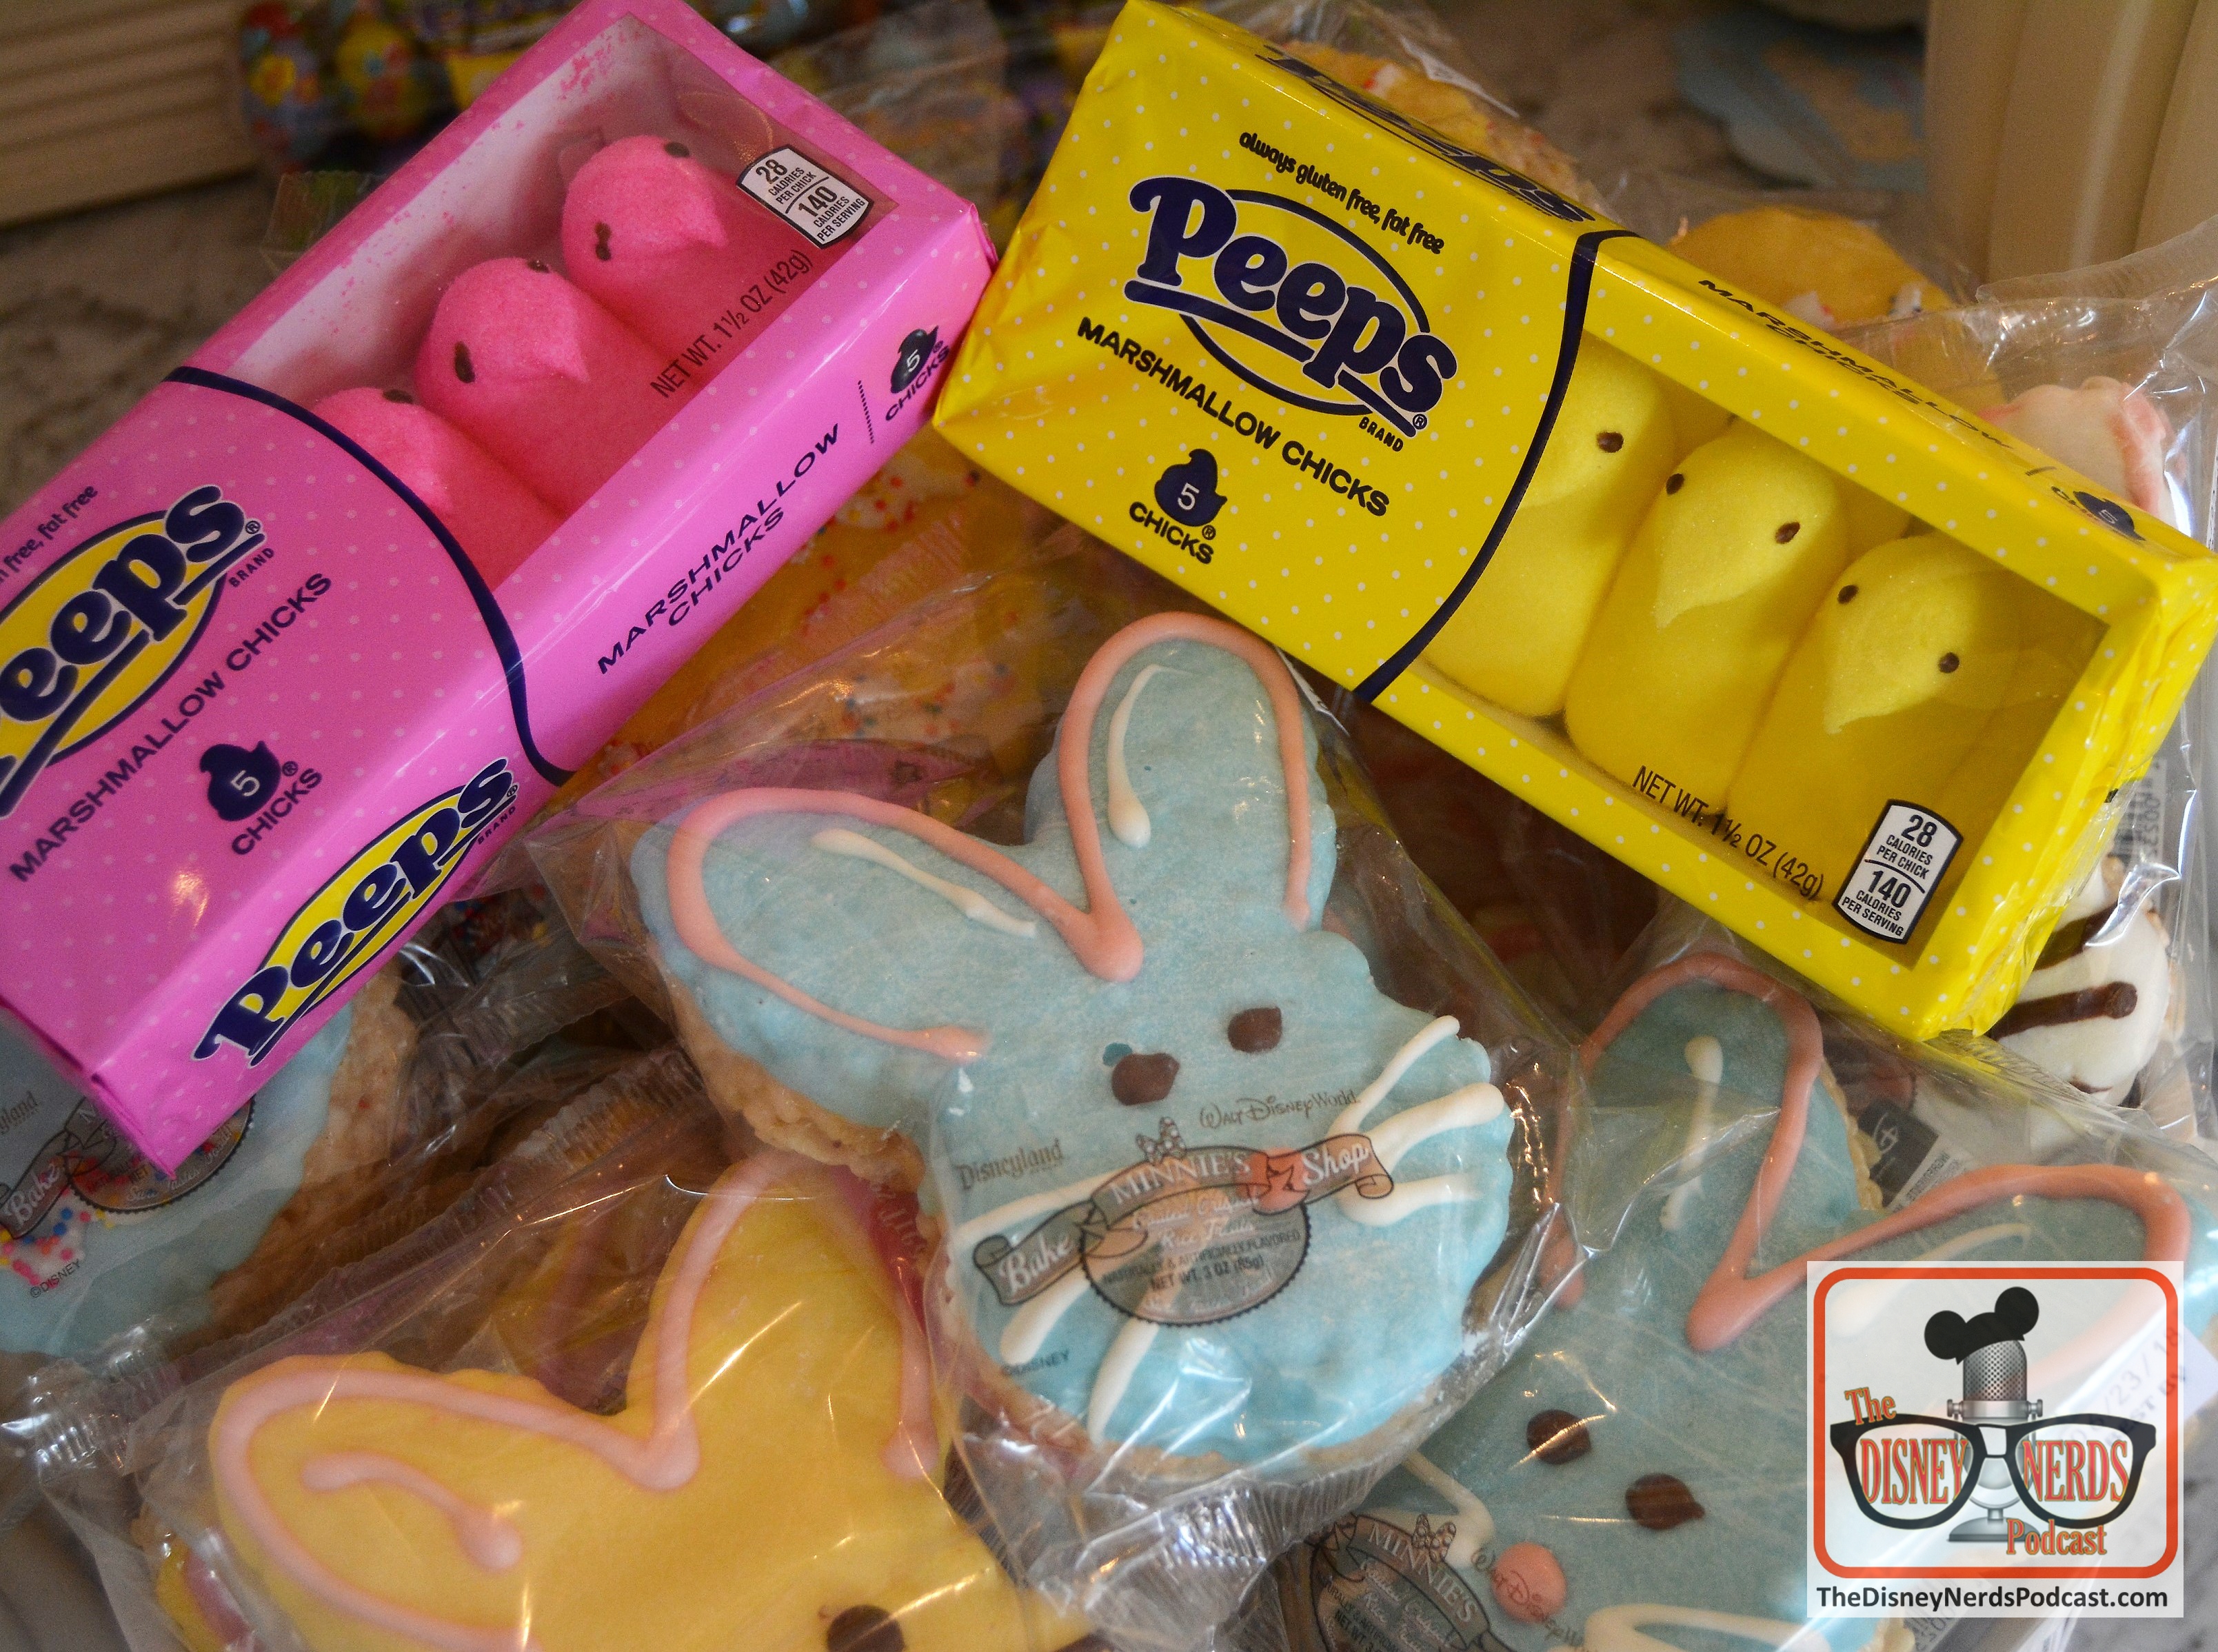 Easter Rice Crispy treats and Peeps - Available all over Walt Disney world - This picture from the contemporary resort.